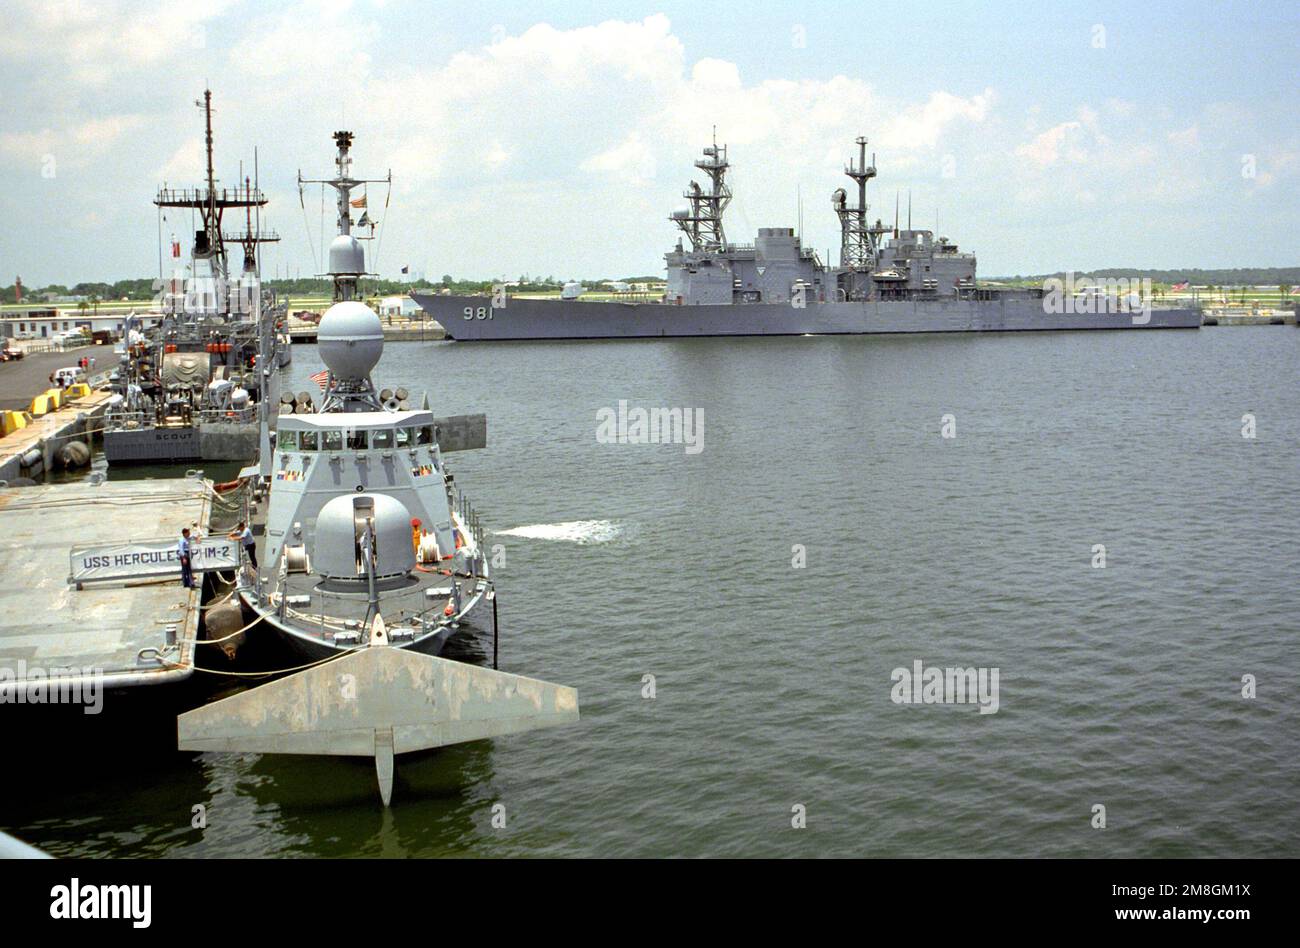 A bow view of the patrol combatant hydrofoil USS HERCULES (PHM-2) moored to a pier, with the mine countermeasures ship USS SCOUT (MCM-8) moored behind. The destroyer JOHN HANCOCK (DD-981) is moored in the background. Base: Naval Station, Mayport State: Florida(FL) Country: United States Of America (USA) Stock Photo